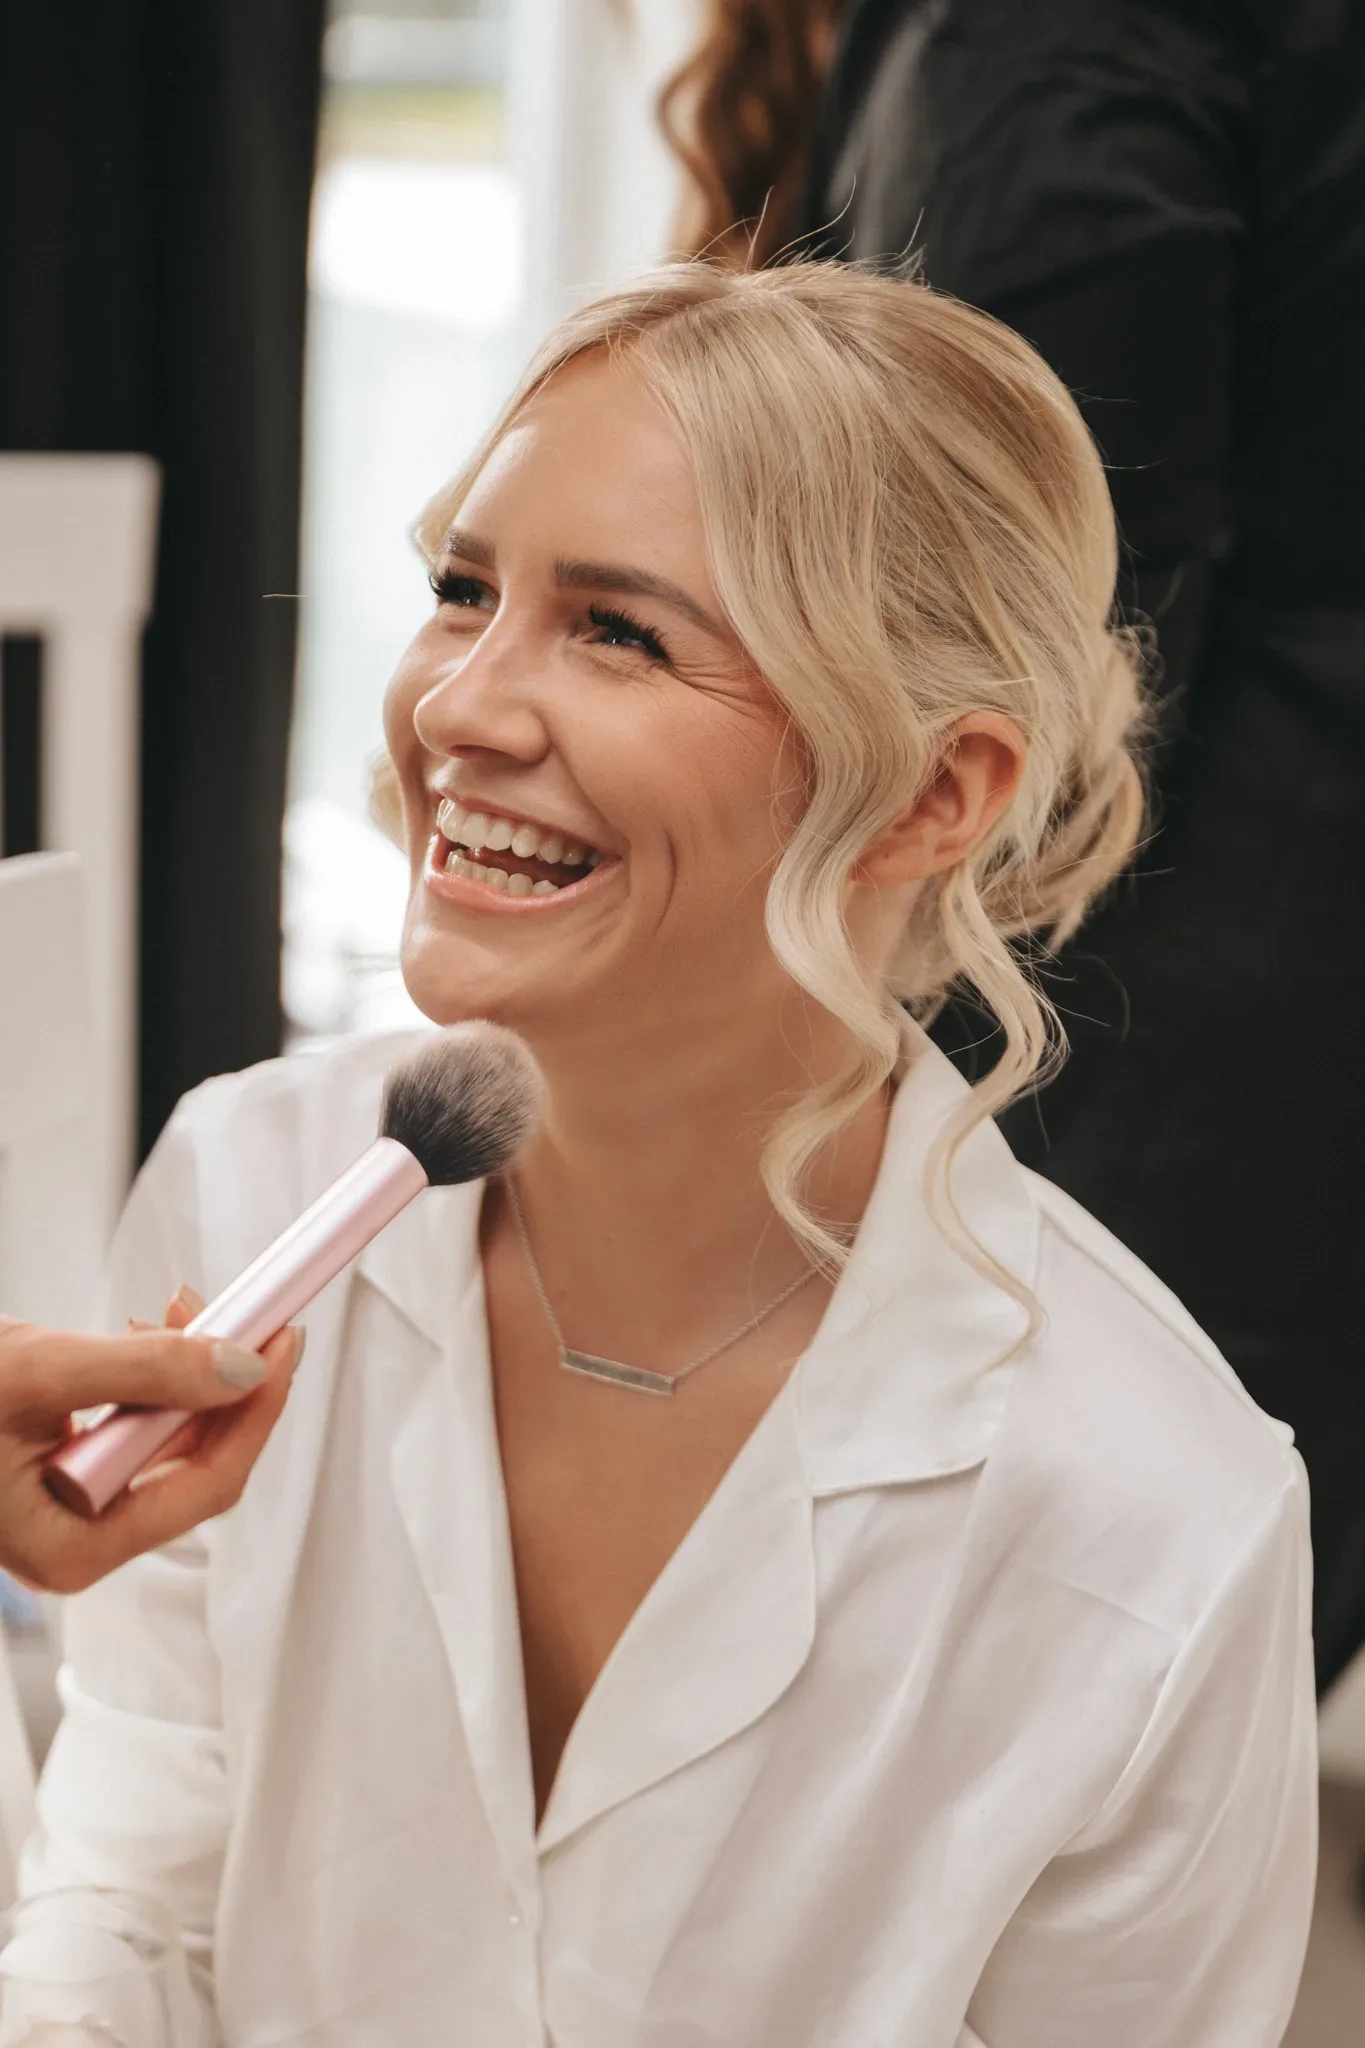 A joyful woman having makeup applied, with curly blond hair and a white shirt, laughing while a makeup artist uses a brush on her cheek in a brightly lit room.